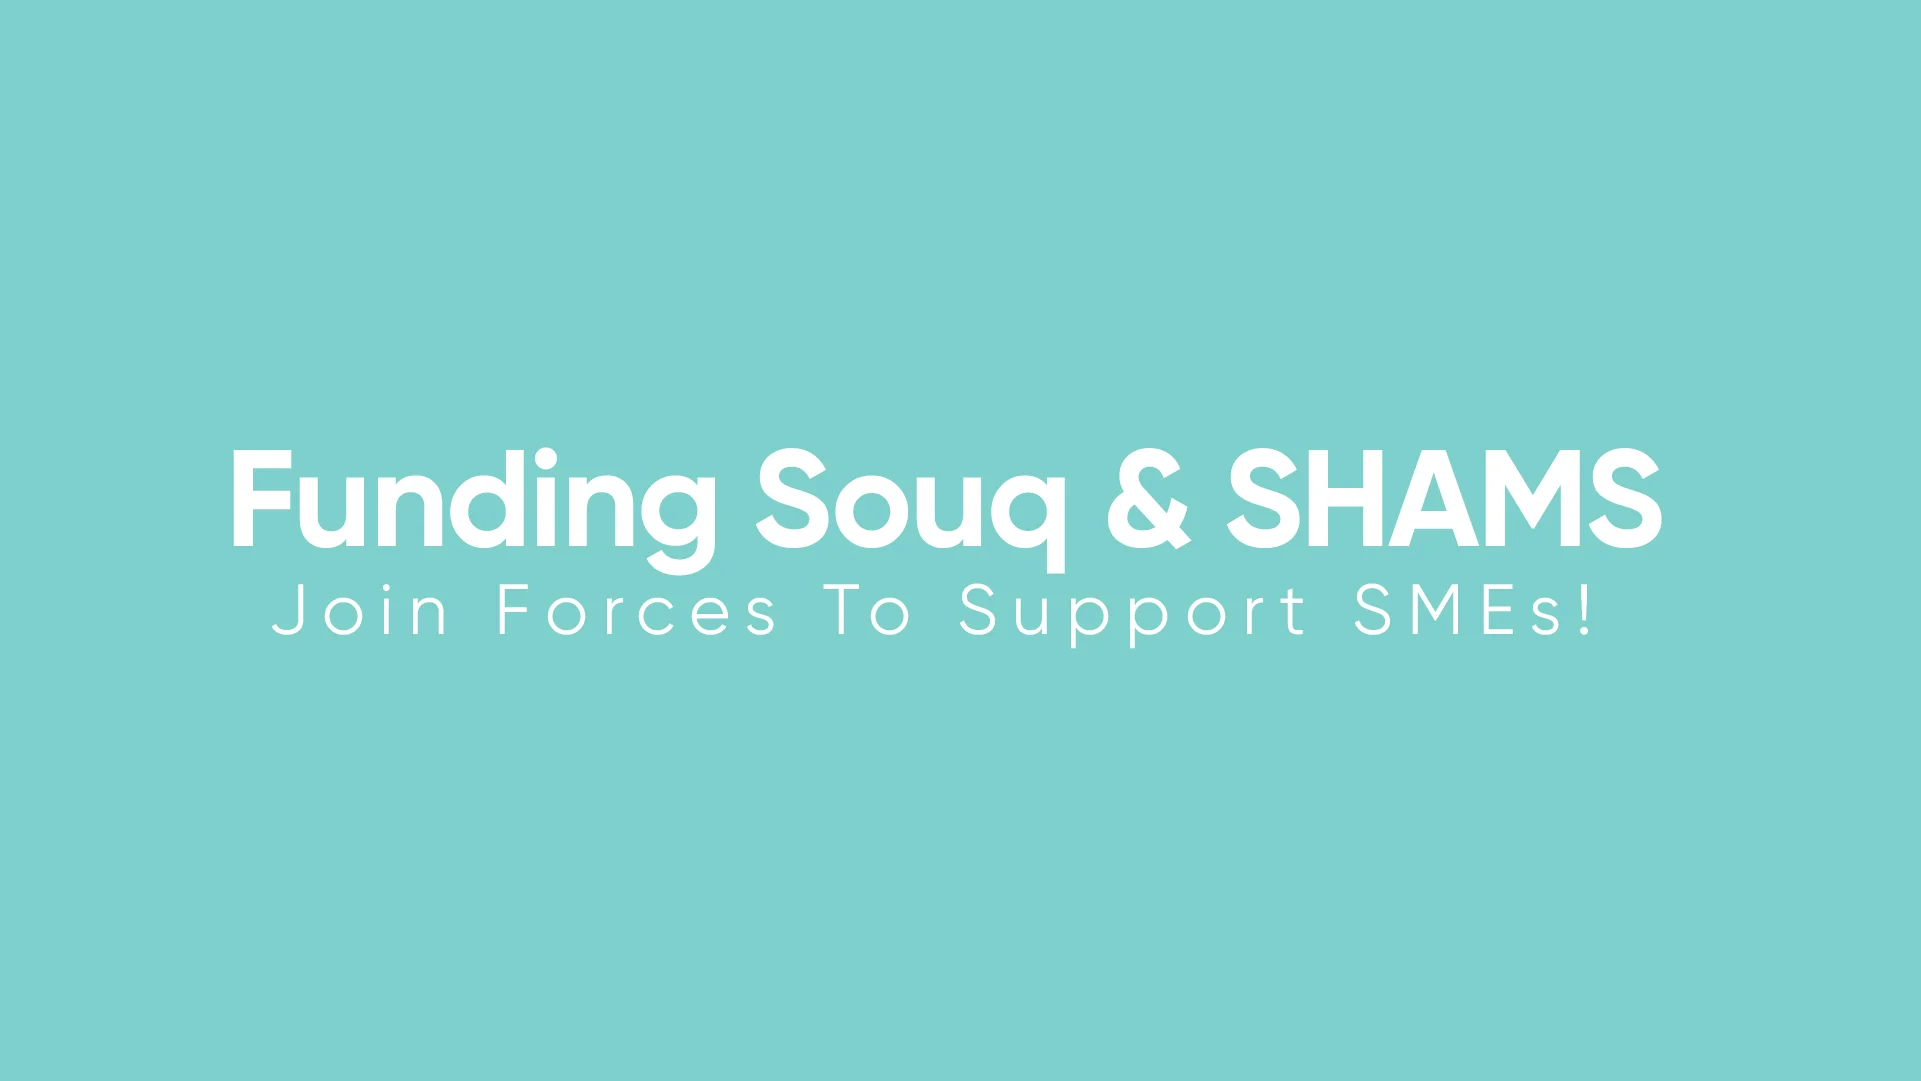 Funding Souq & SHAMS Join Forces to Support SMEs!